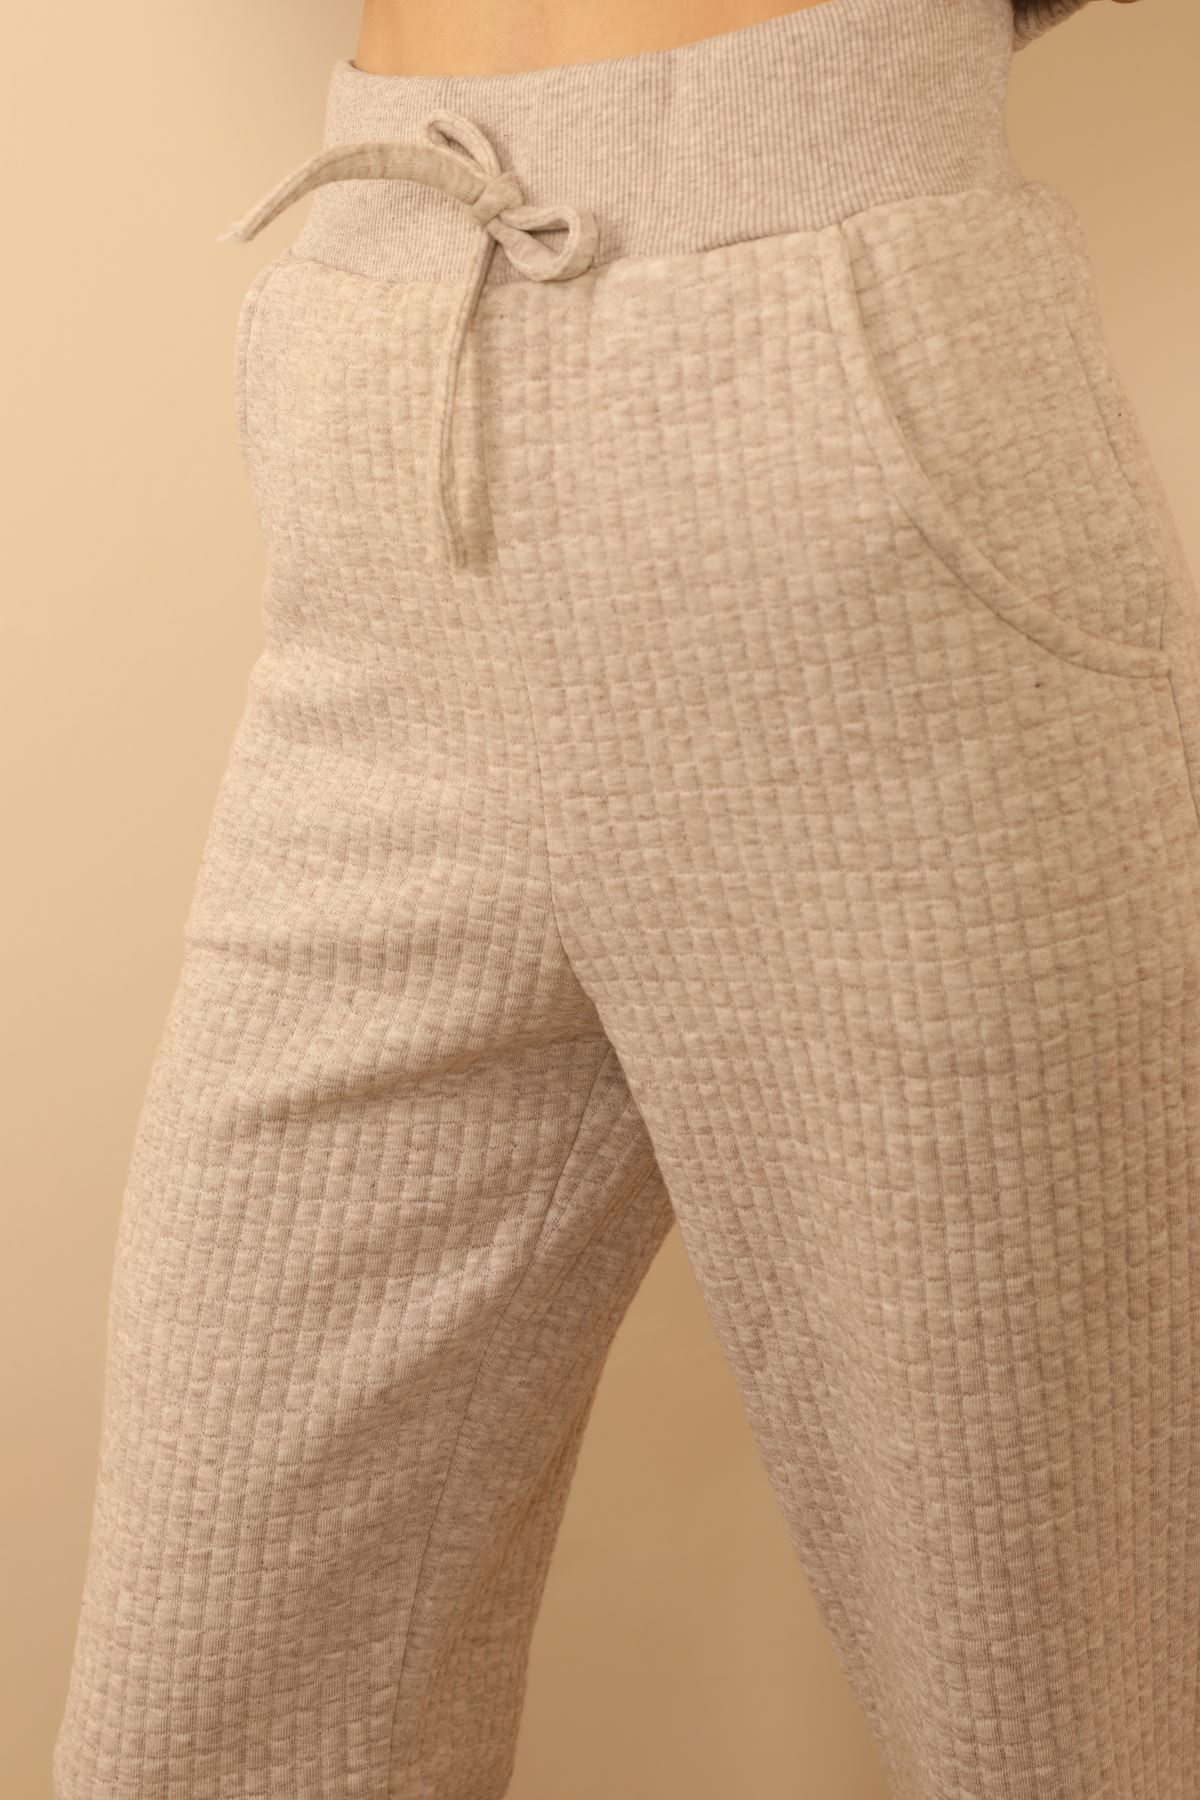 Honeycomb Fabric Ankle Length Comfy Fit Women'S Sweatpant - Beige 